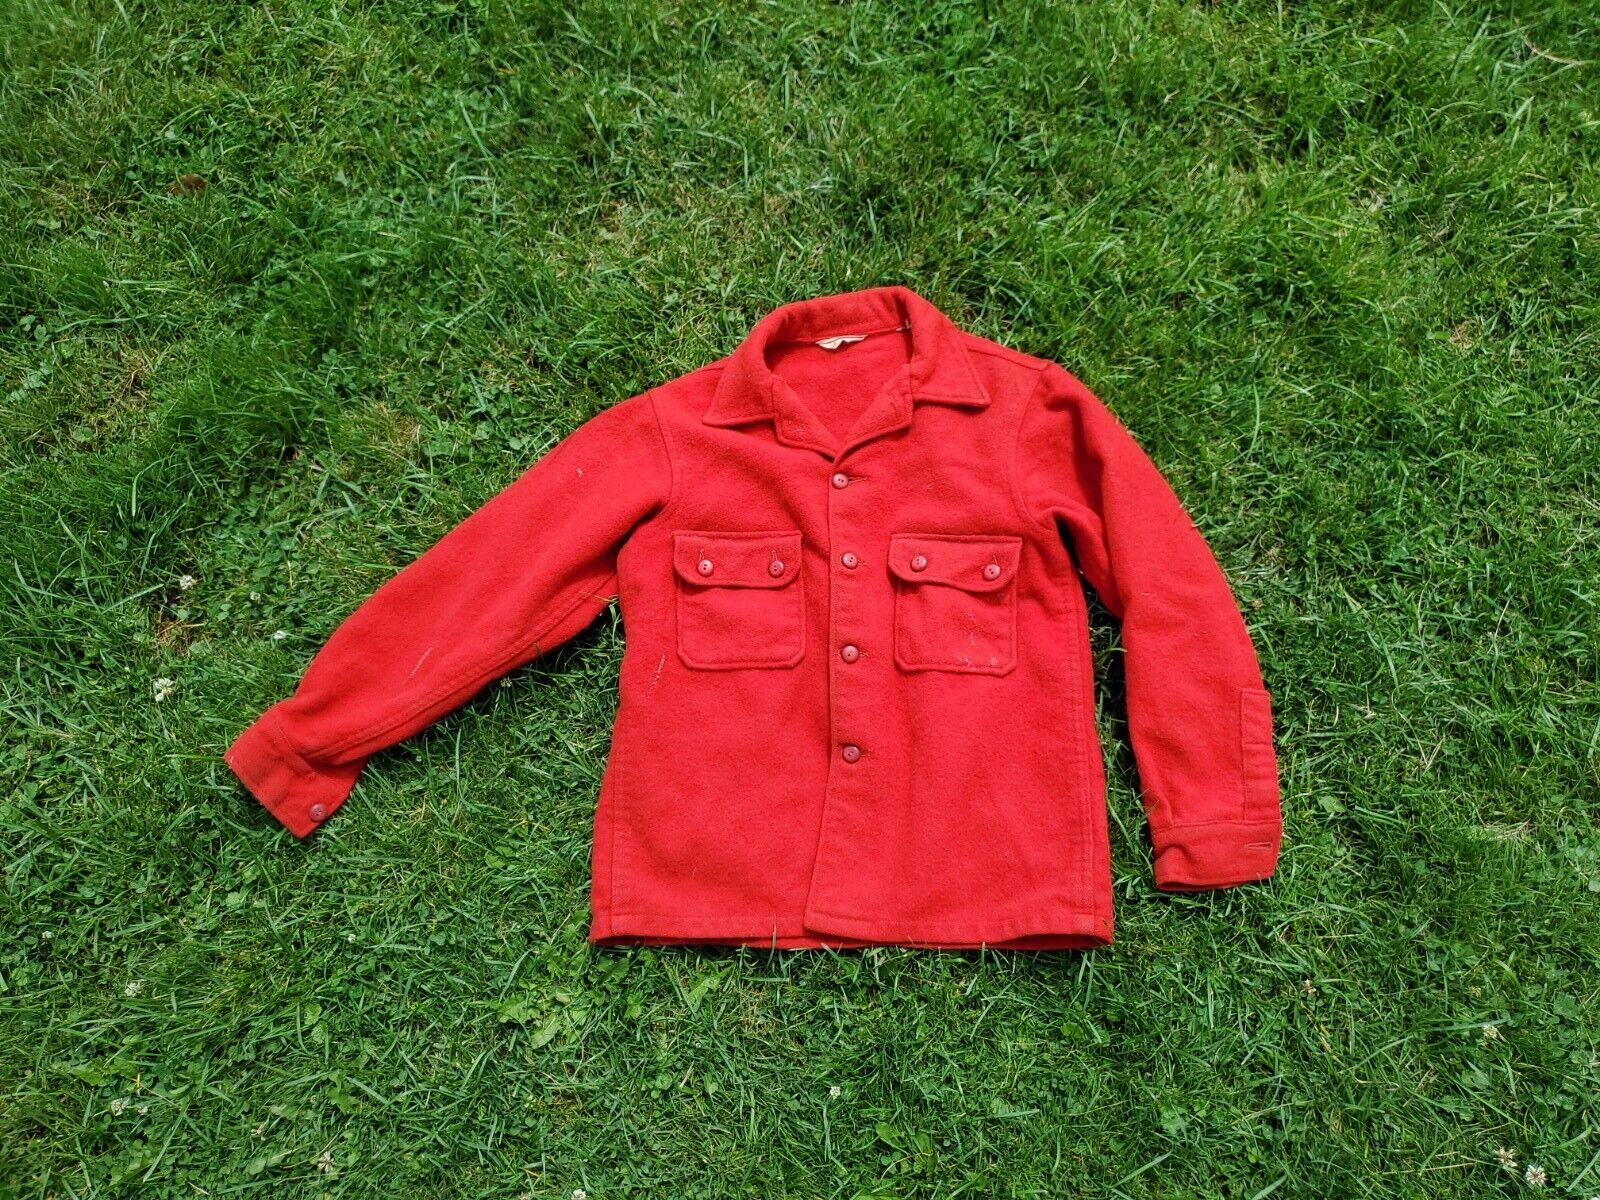 Vintage Boy Scouts of America BSA Red Wool Coat Official Jacket Shirt READ